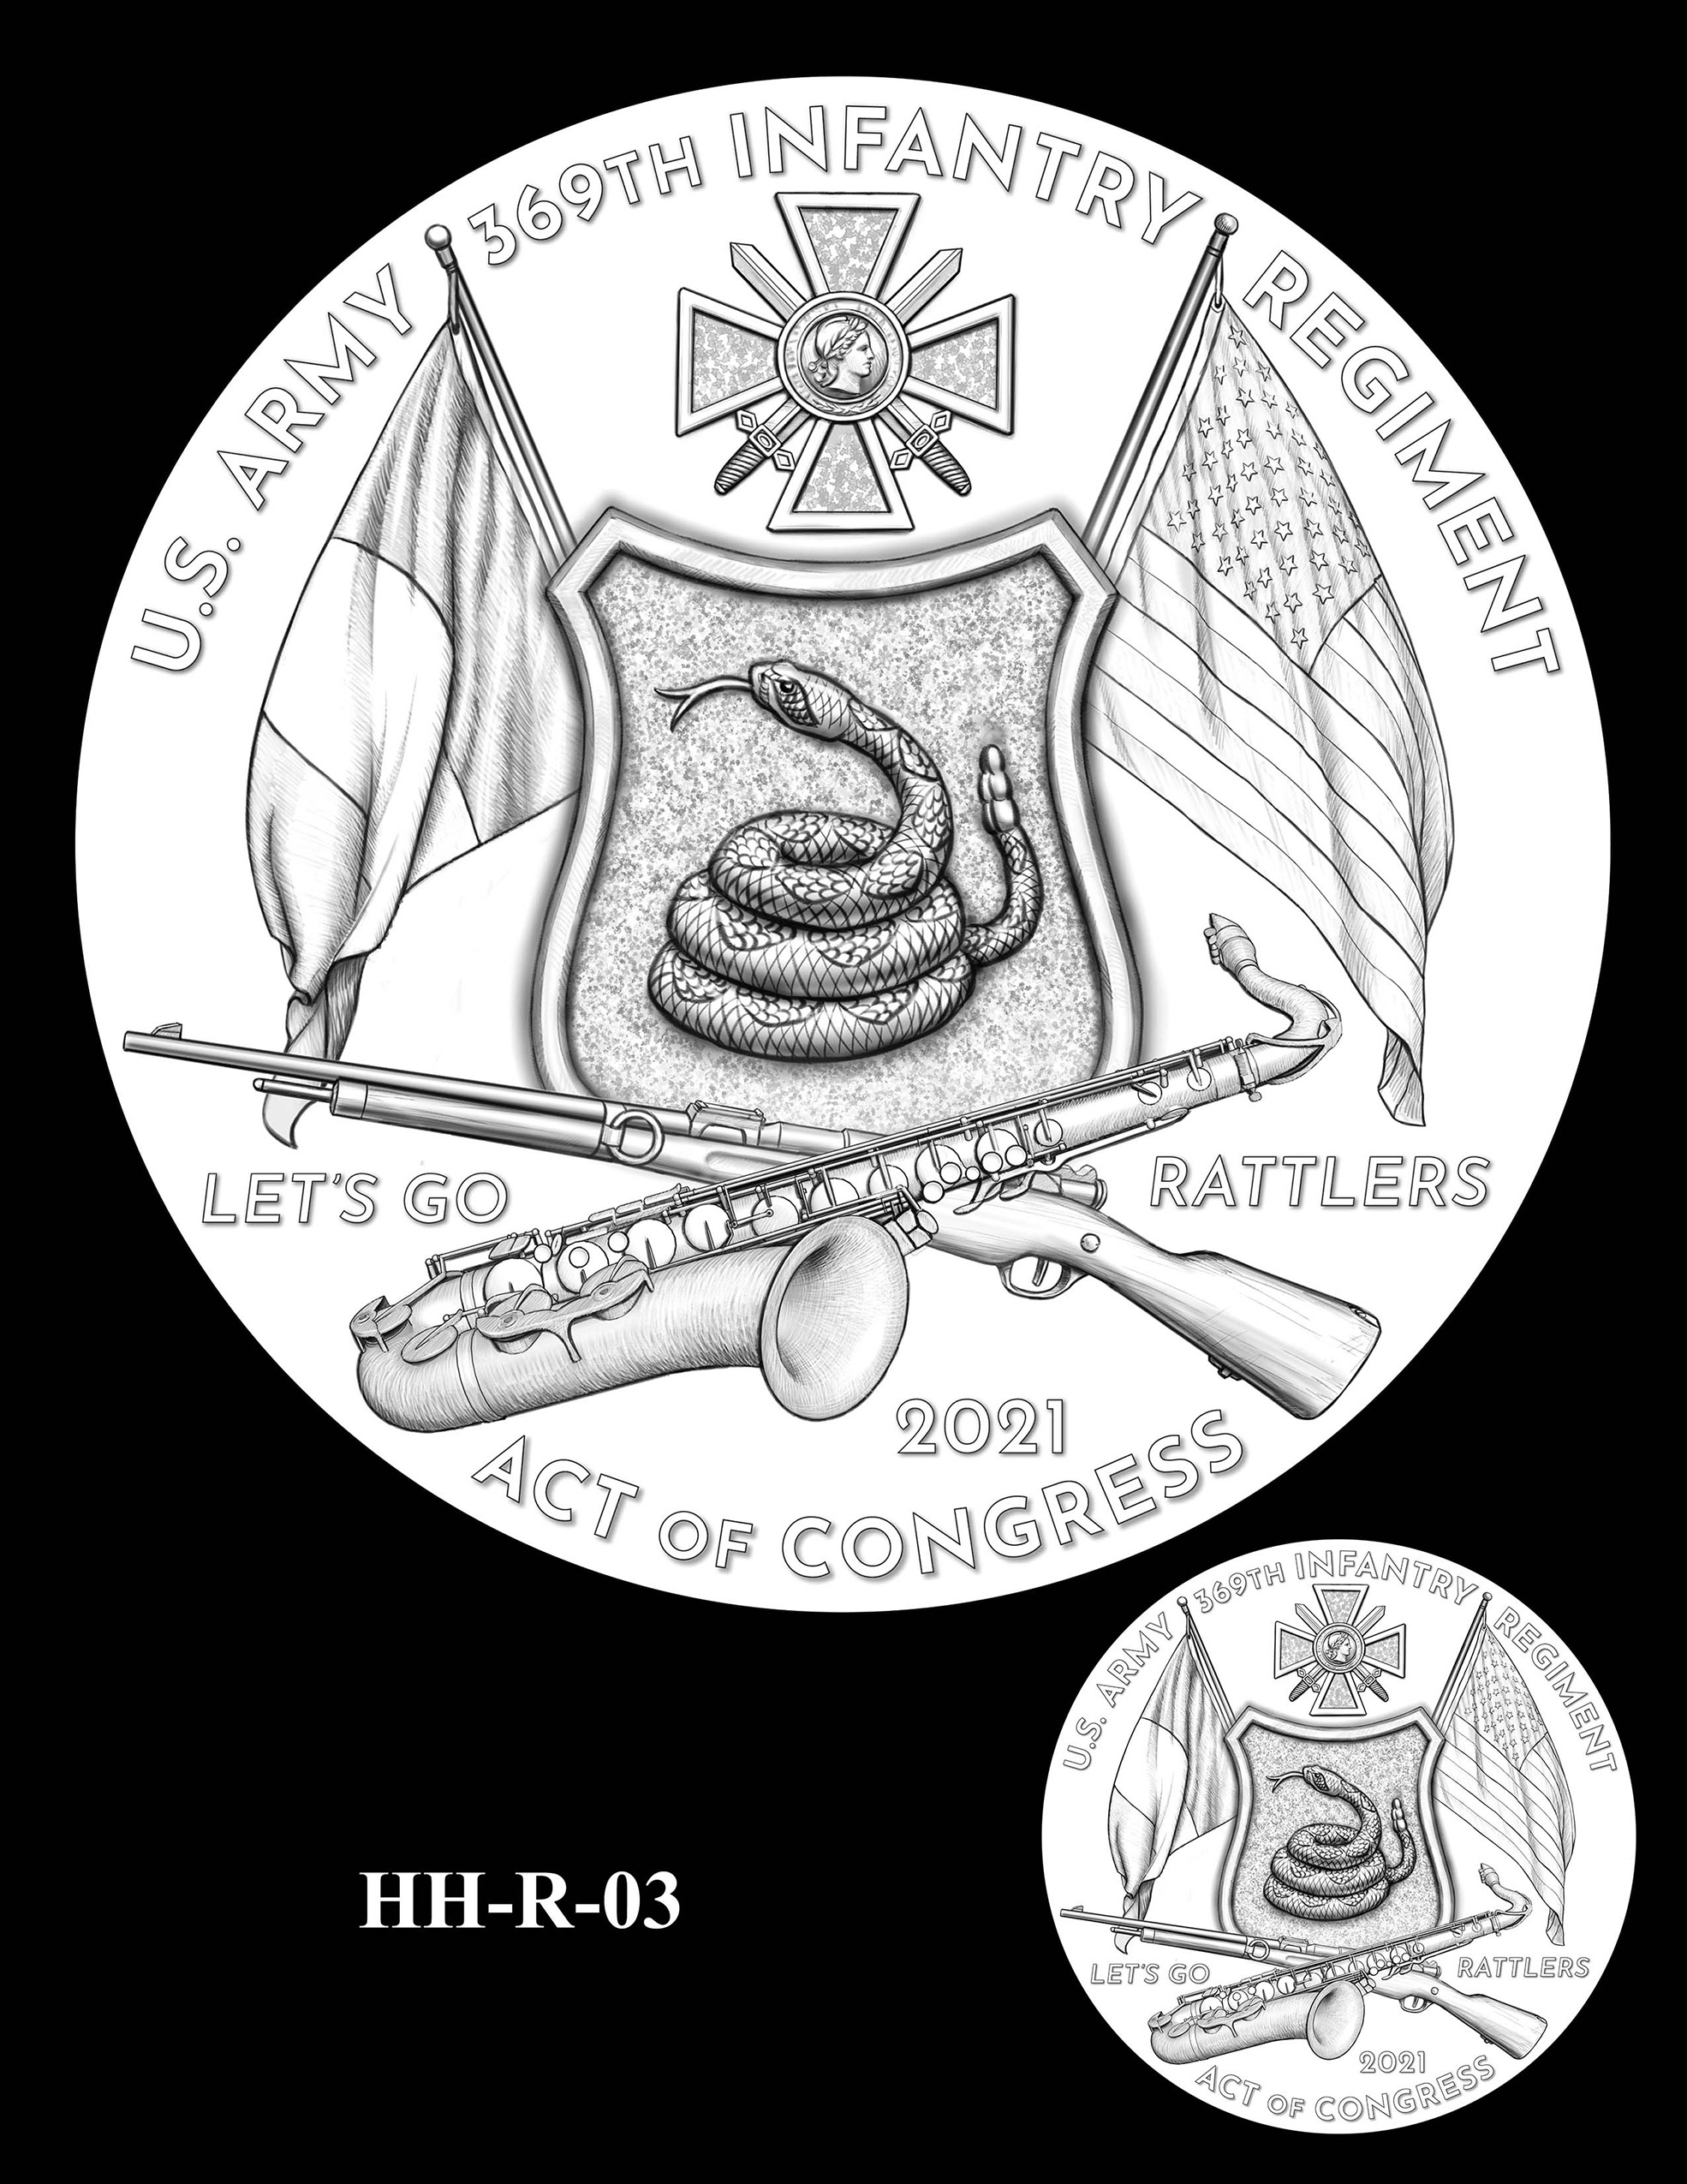 HH-R-03 -- Harlem Hellfighters Congressional Gold Medal